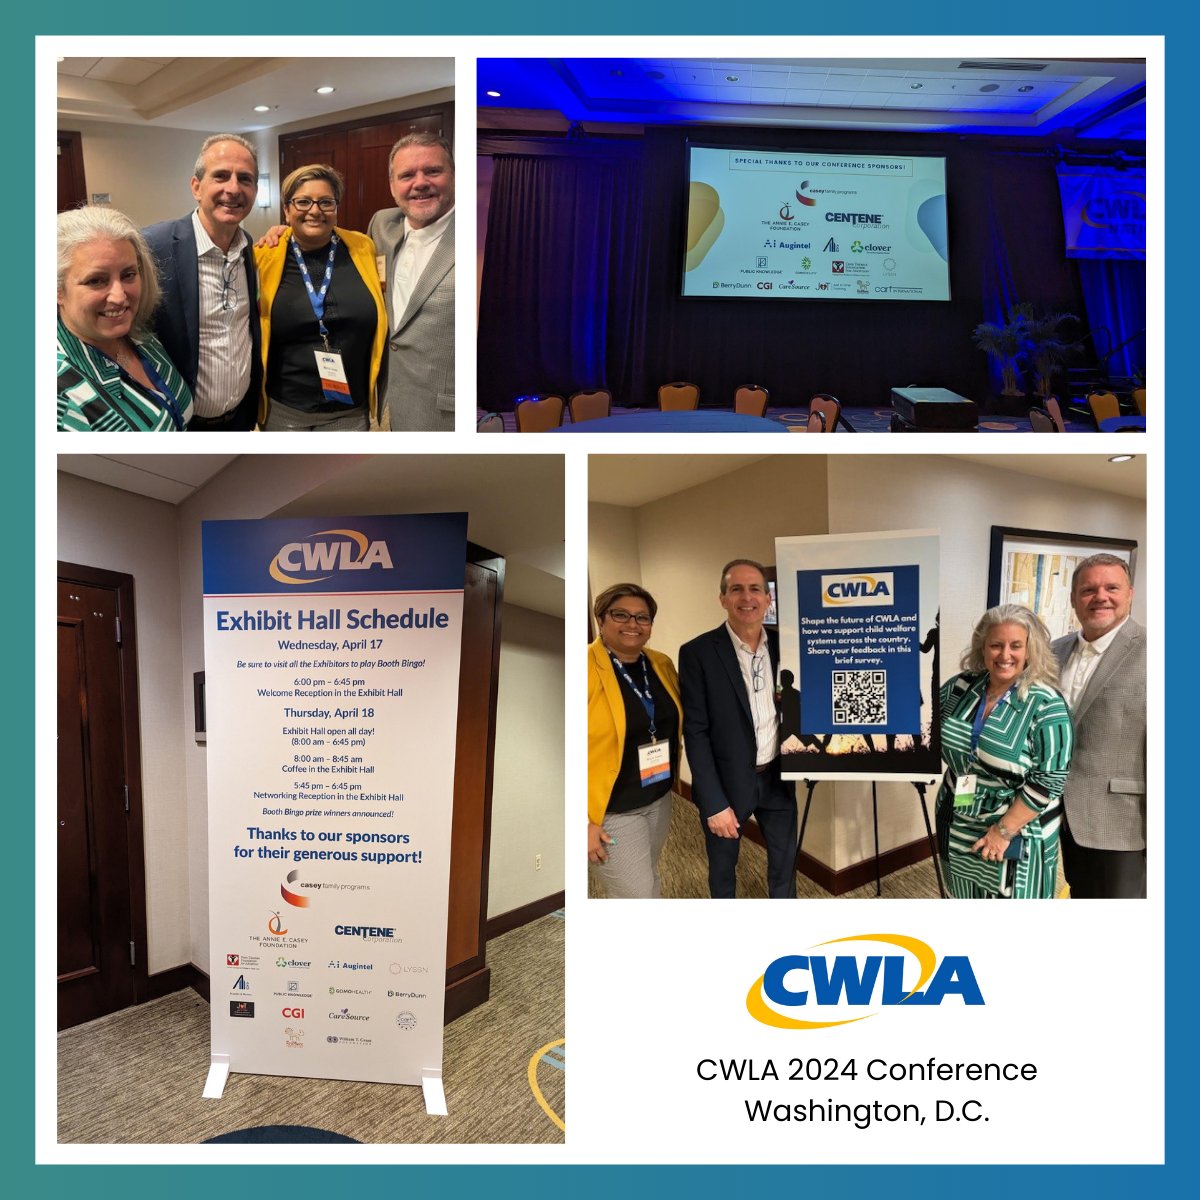 Thank you to @CWLAofficial for having us for an outstanding event!